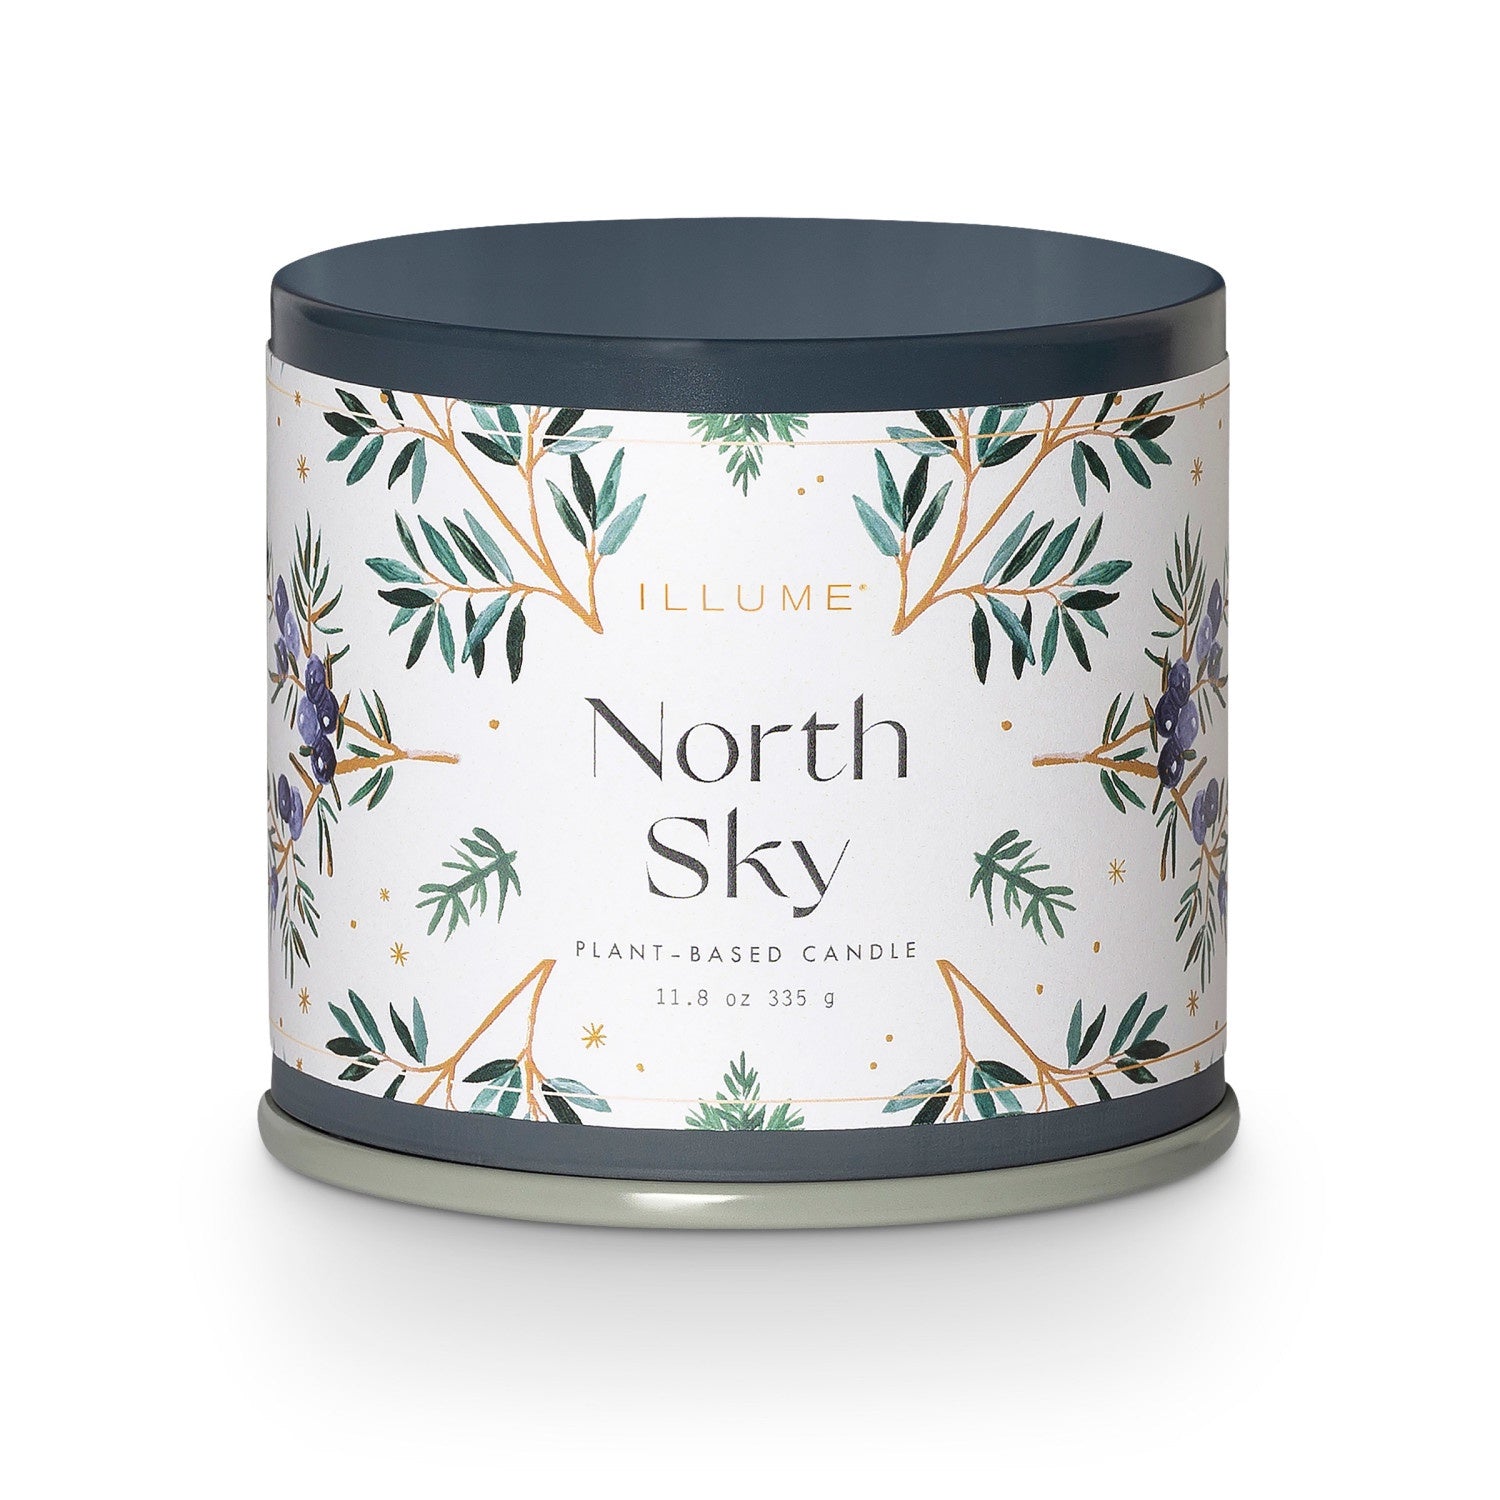 The North Sky Vanity Tin Candle